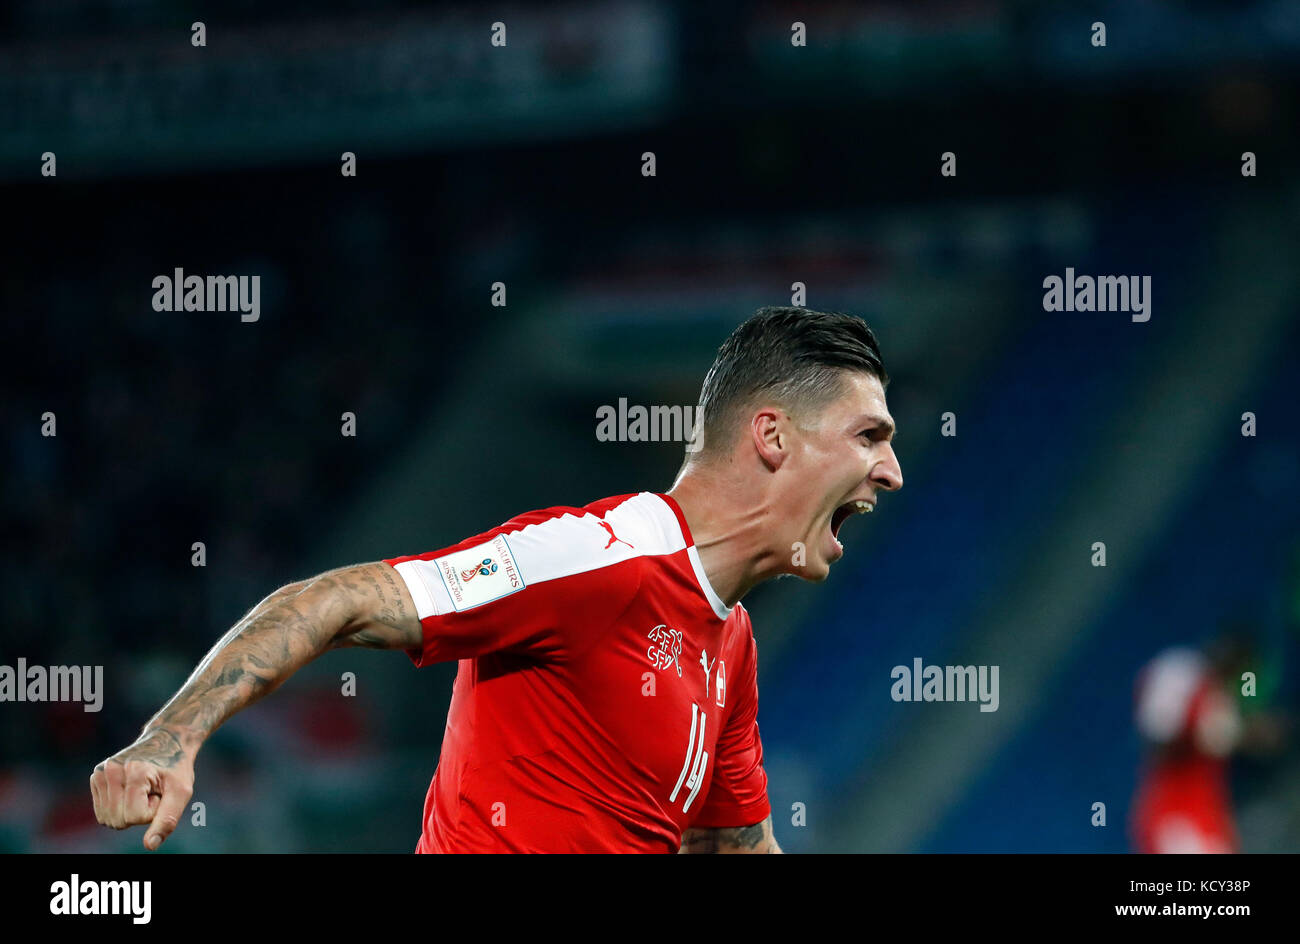 Basel, Switzerland. 7th Oct, 2017. Switzerland's Steven Zuber reacts after scoring during the FIFA World Cup 2018 Qualifiers Group B match between Switzerland and Hungary in Basel, Switzerland, Oct. 7, 2017. Switzerland won 5-2. Credit: Ruben Sprich/Xinhua/Alamy Live News Stock Photo